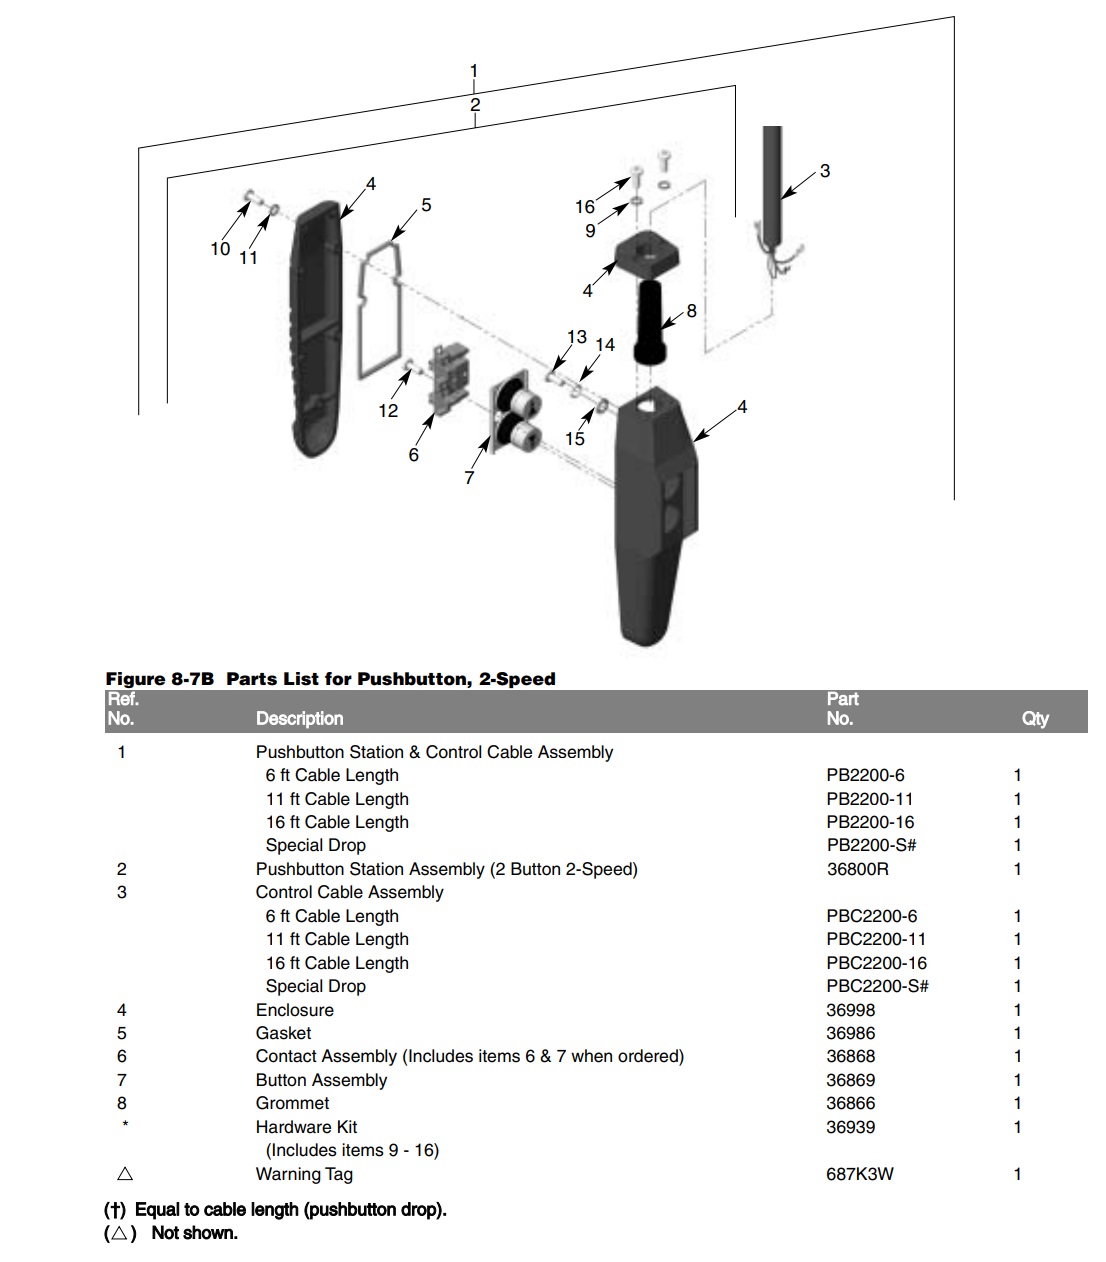 Coffing EC Series 2-Speed Pushbutton Station Diagram and Parts List